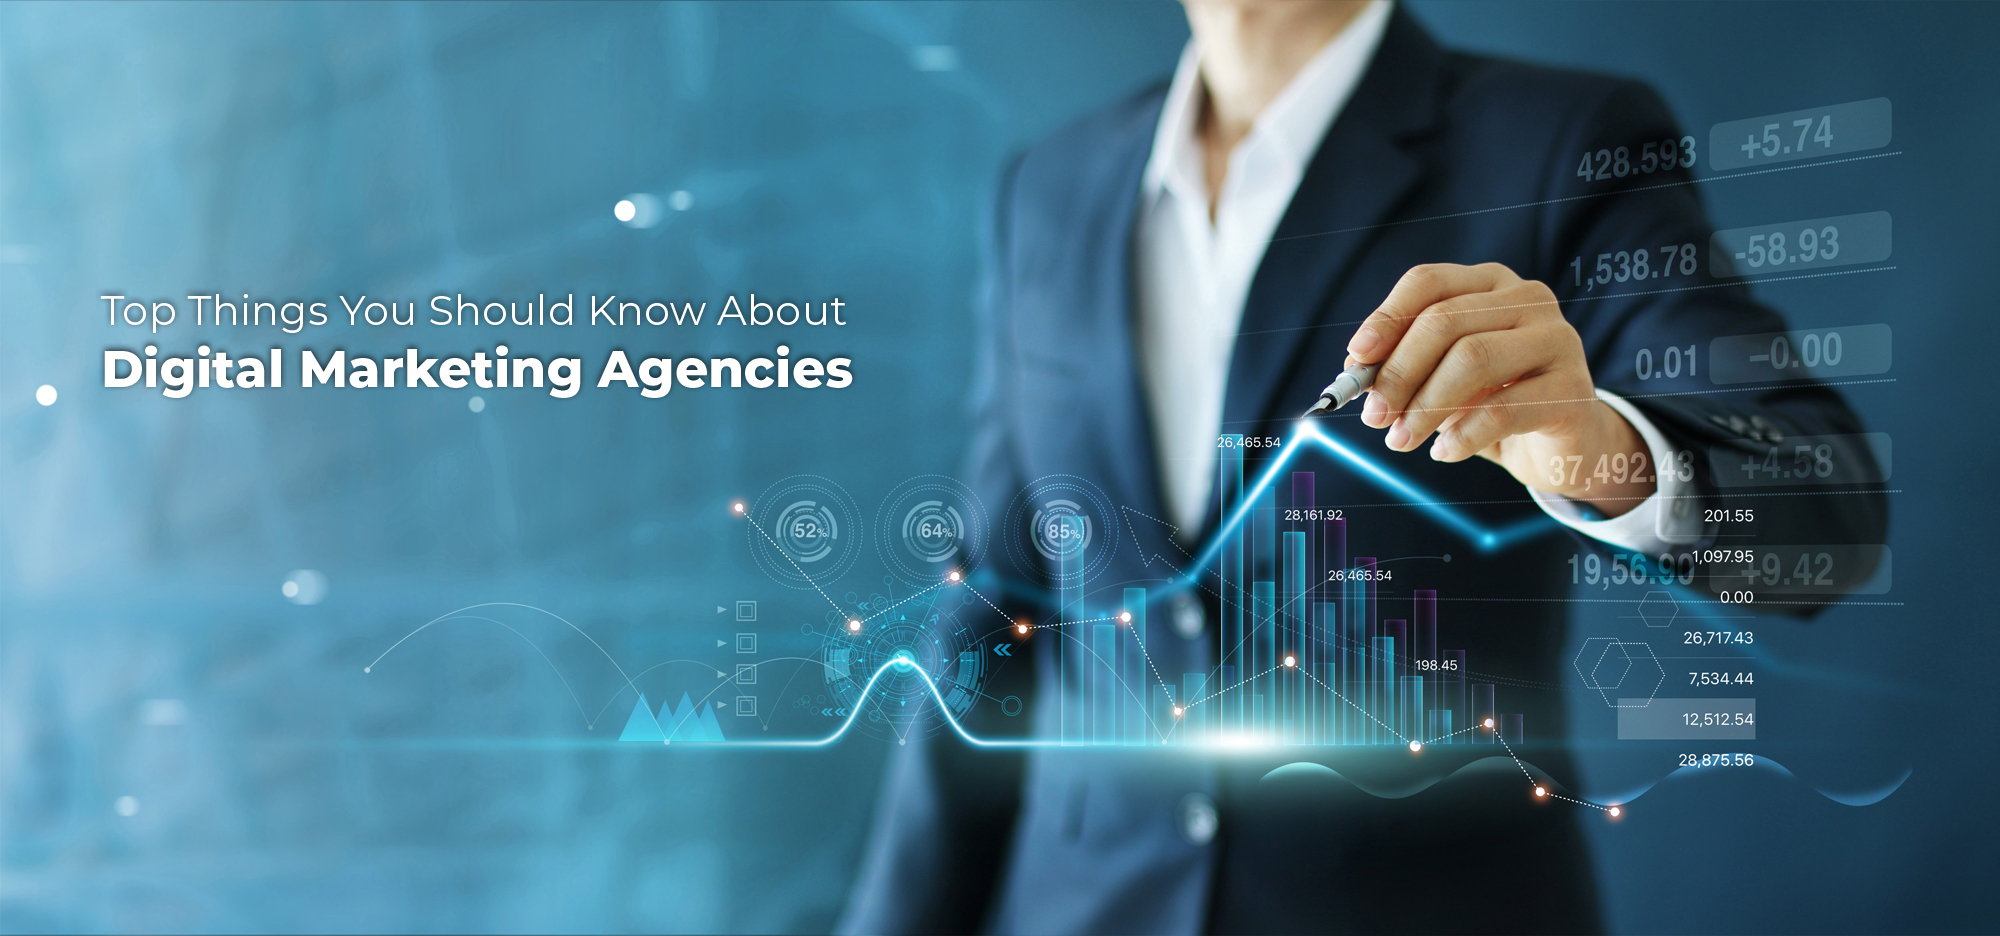 Top Things You Should Know About Digital Marketing Agencies